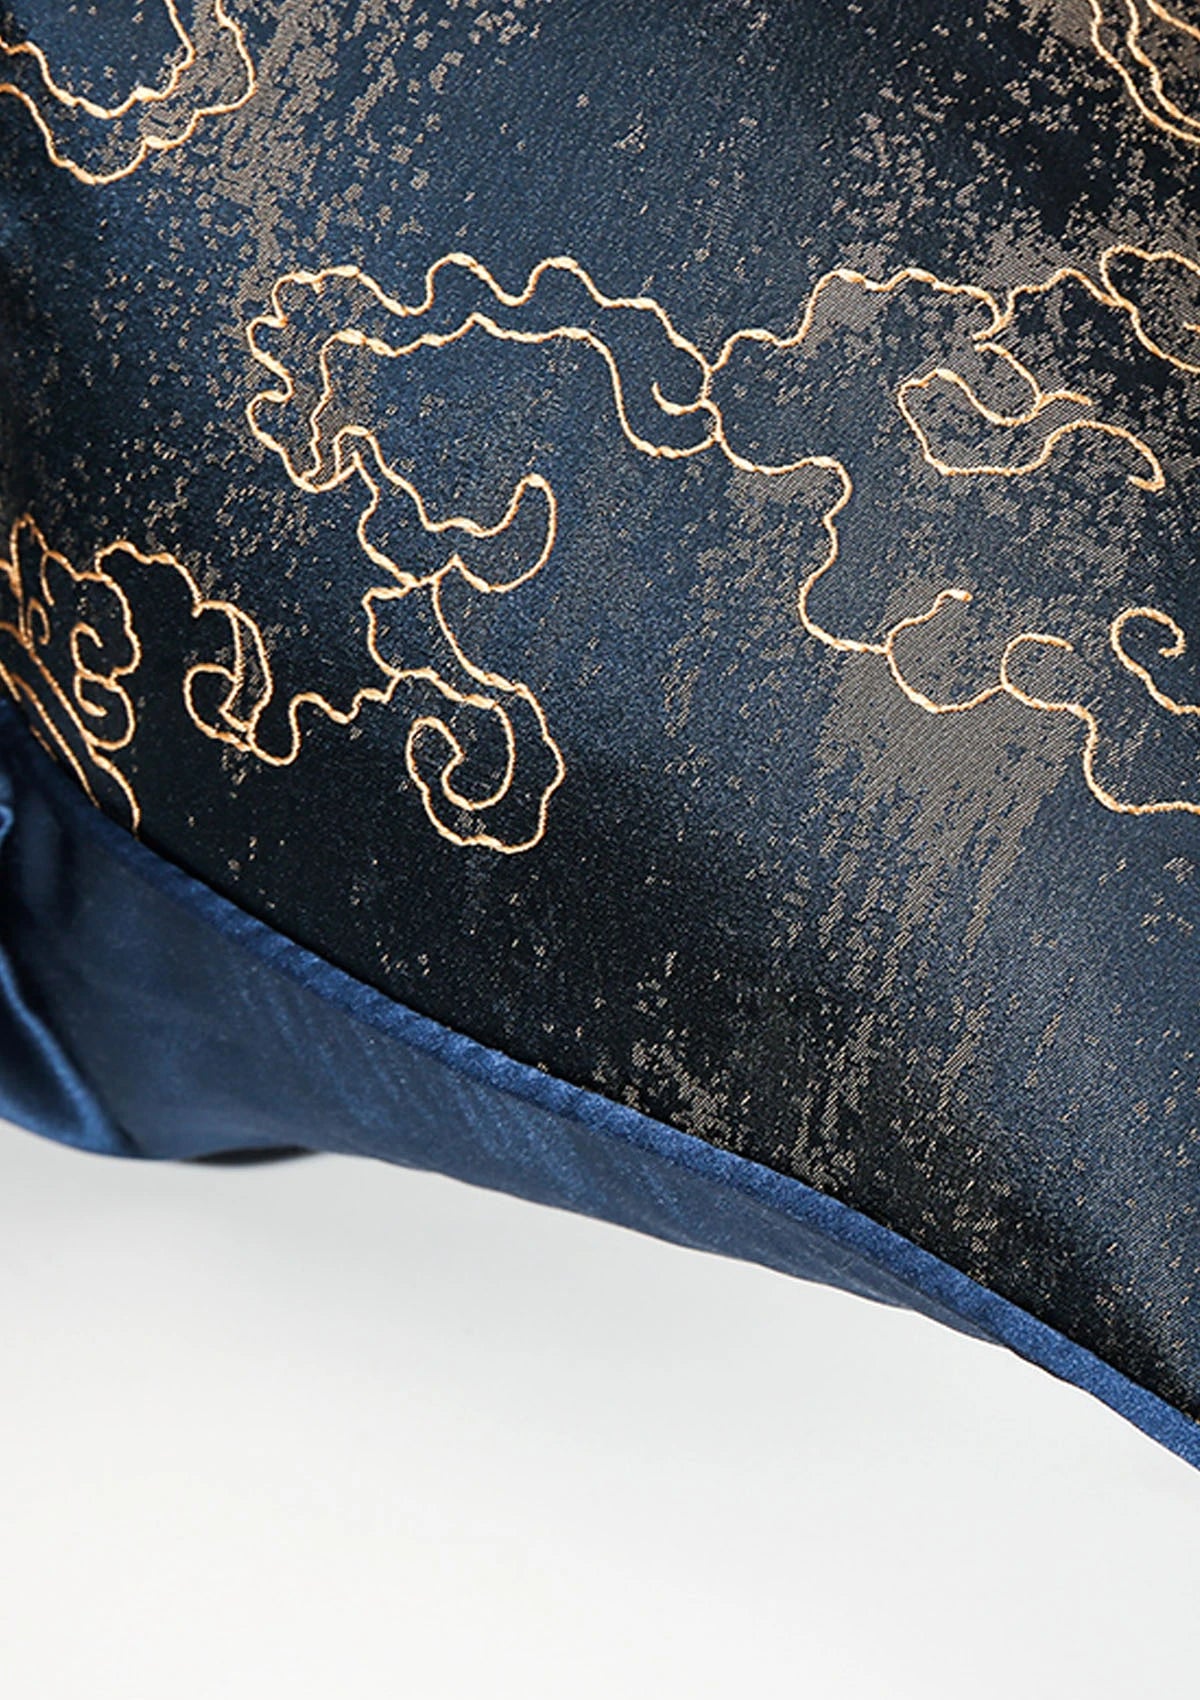 Close-up view of a navy cushion cover with gold accents